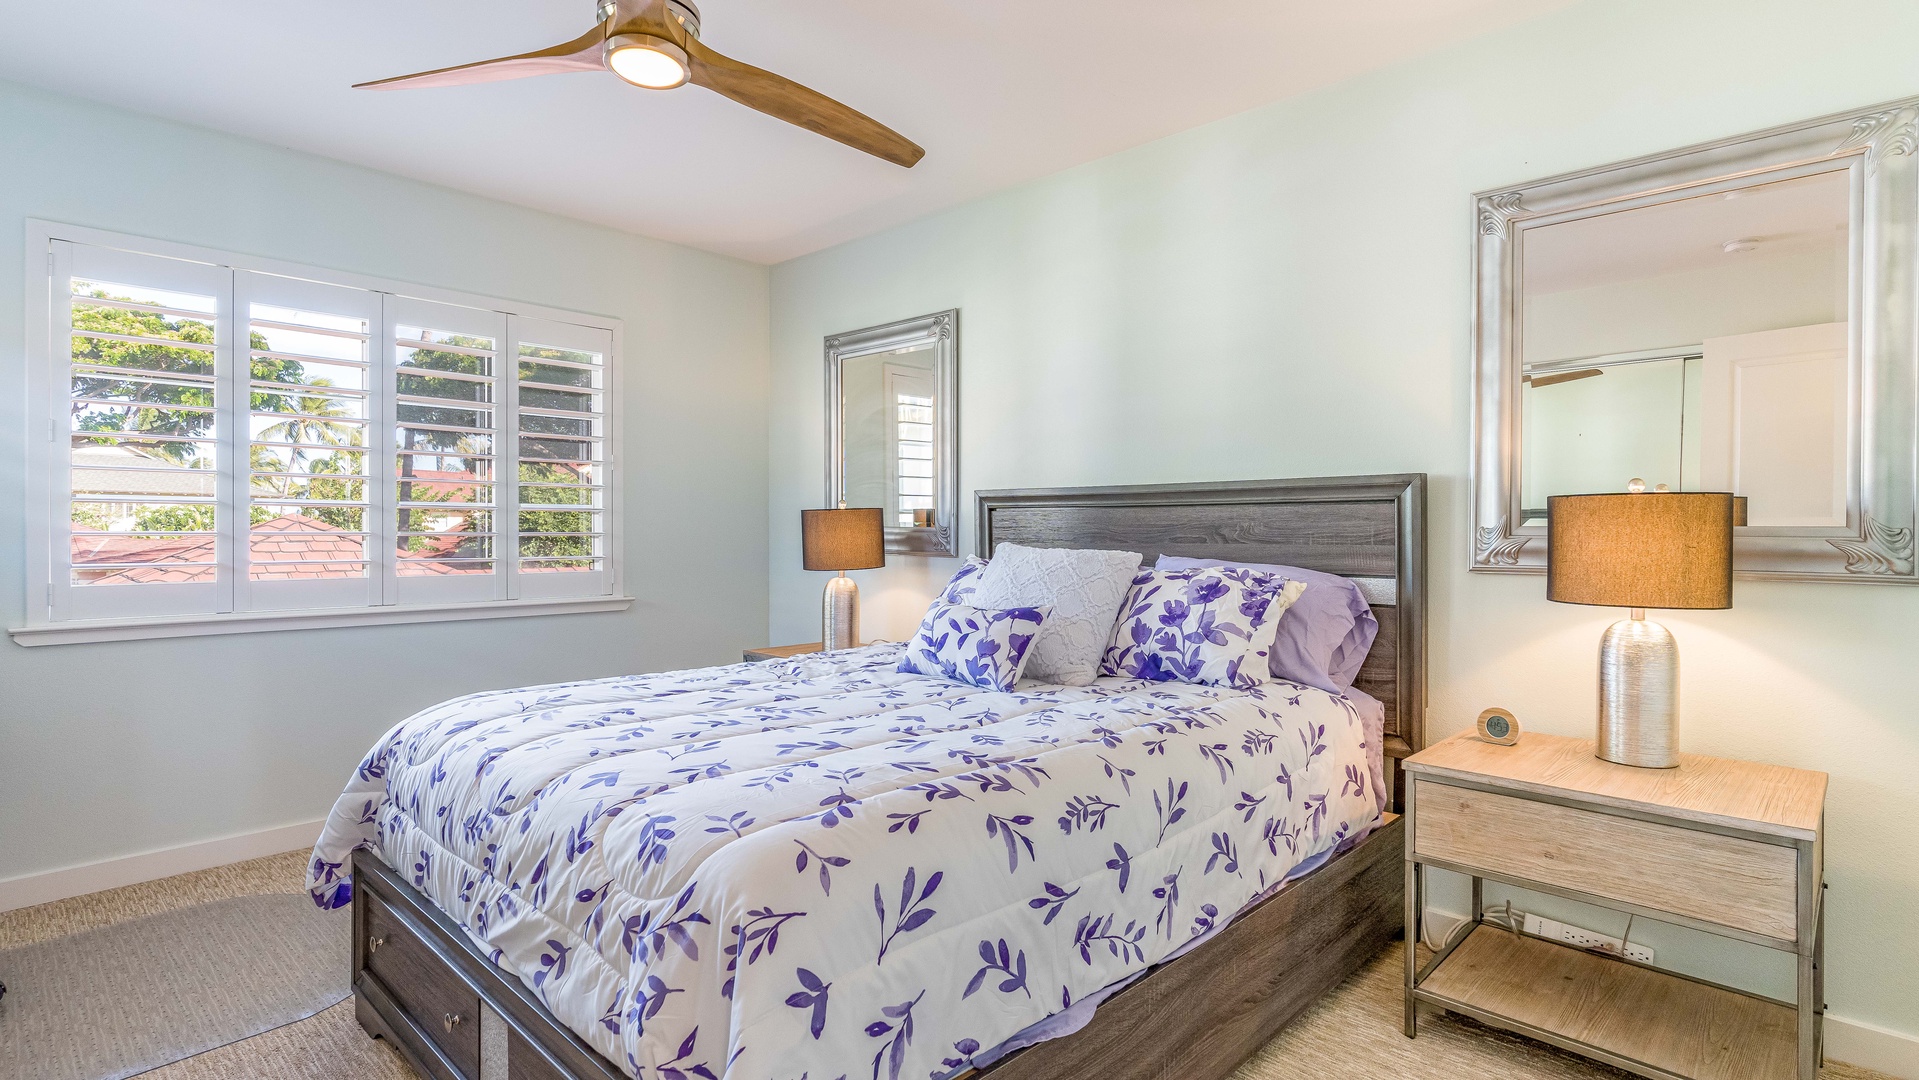 Kapolei Vacation Rentals, Kai Lani 21C - The second guest bedroom is brightly decorated with soft patterns and linens.